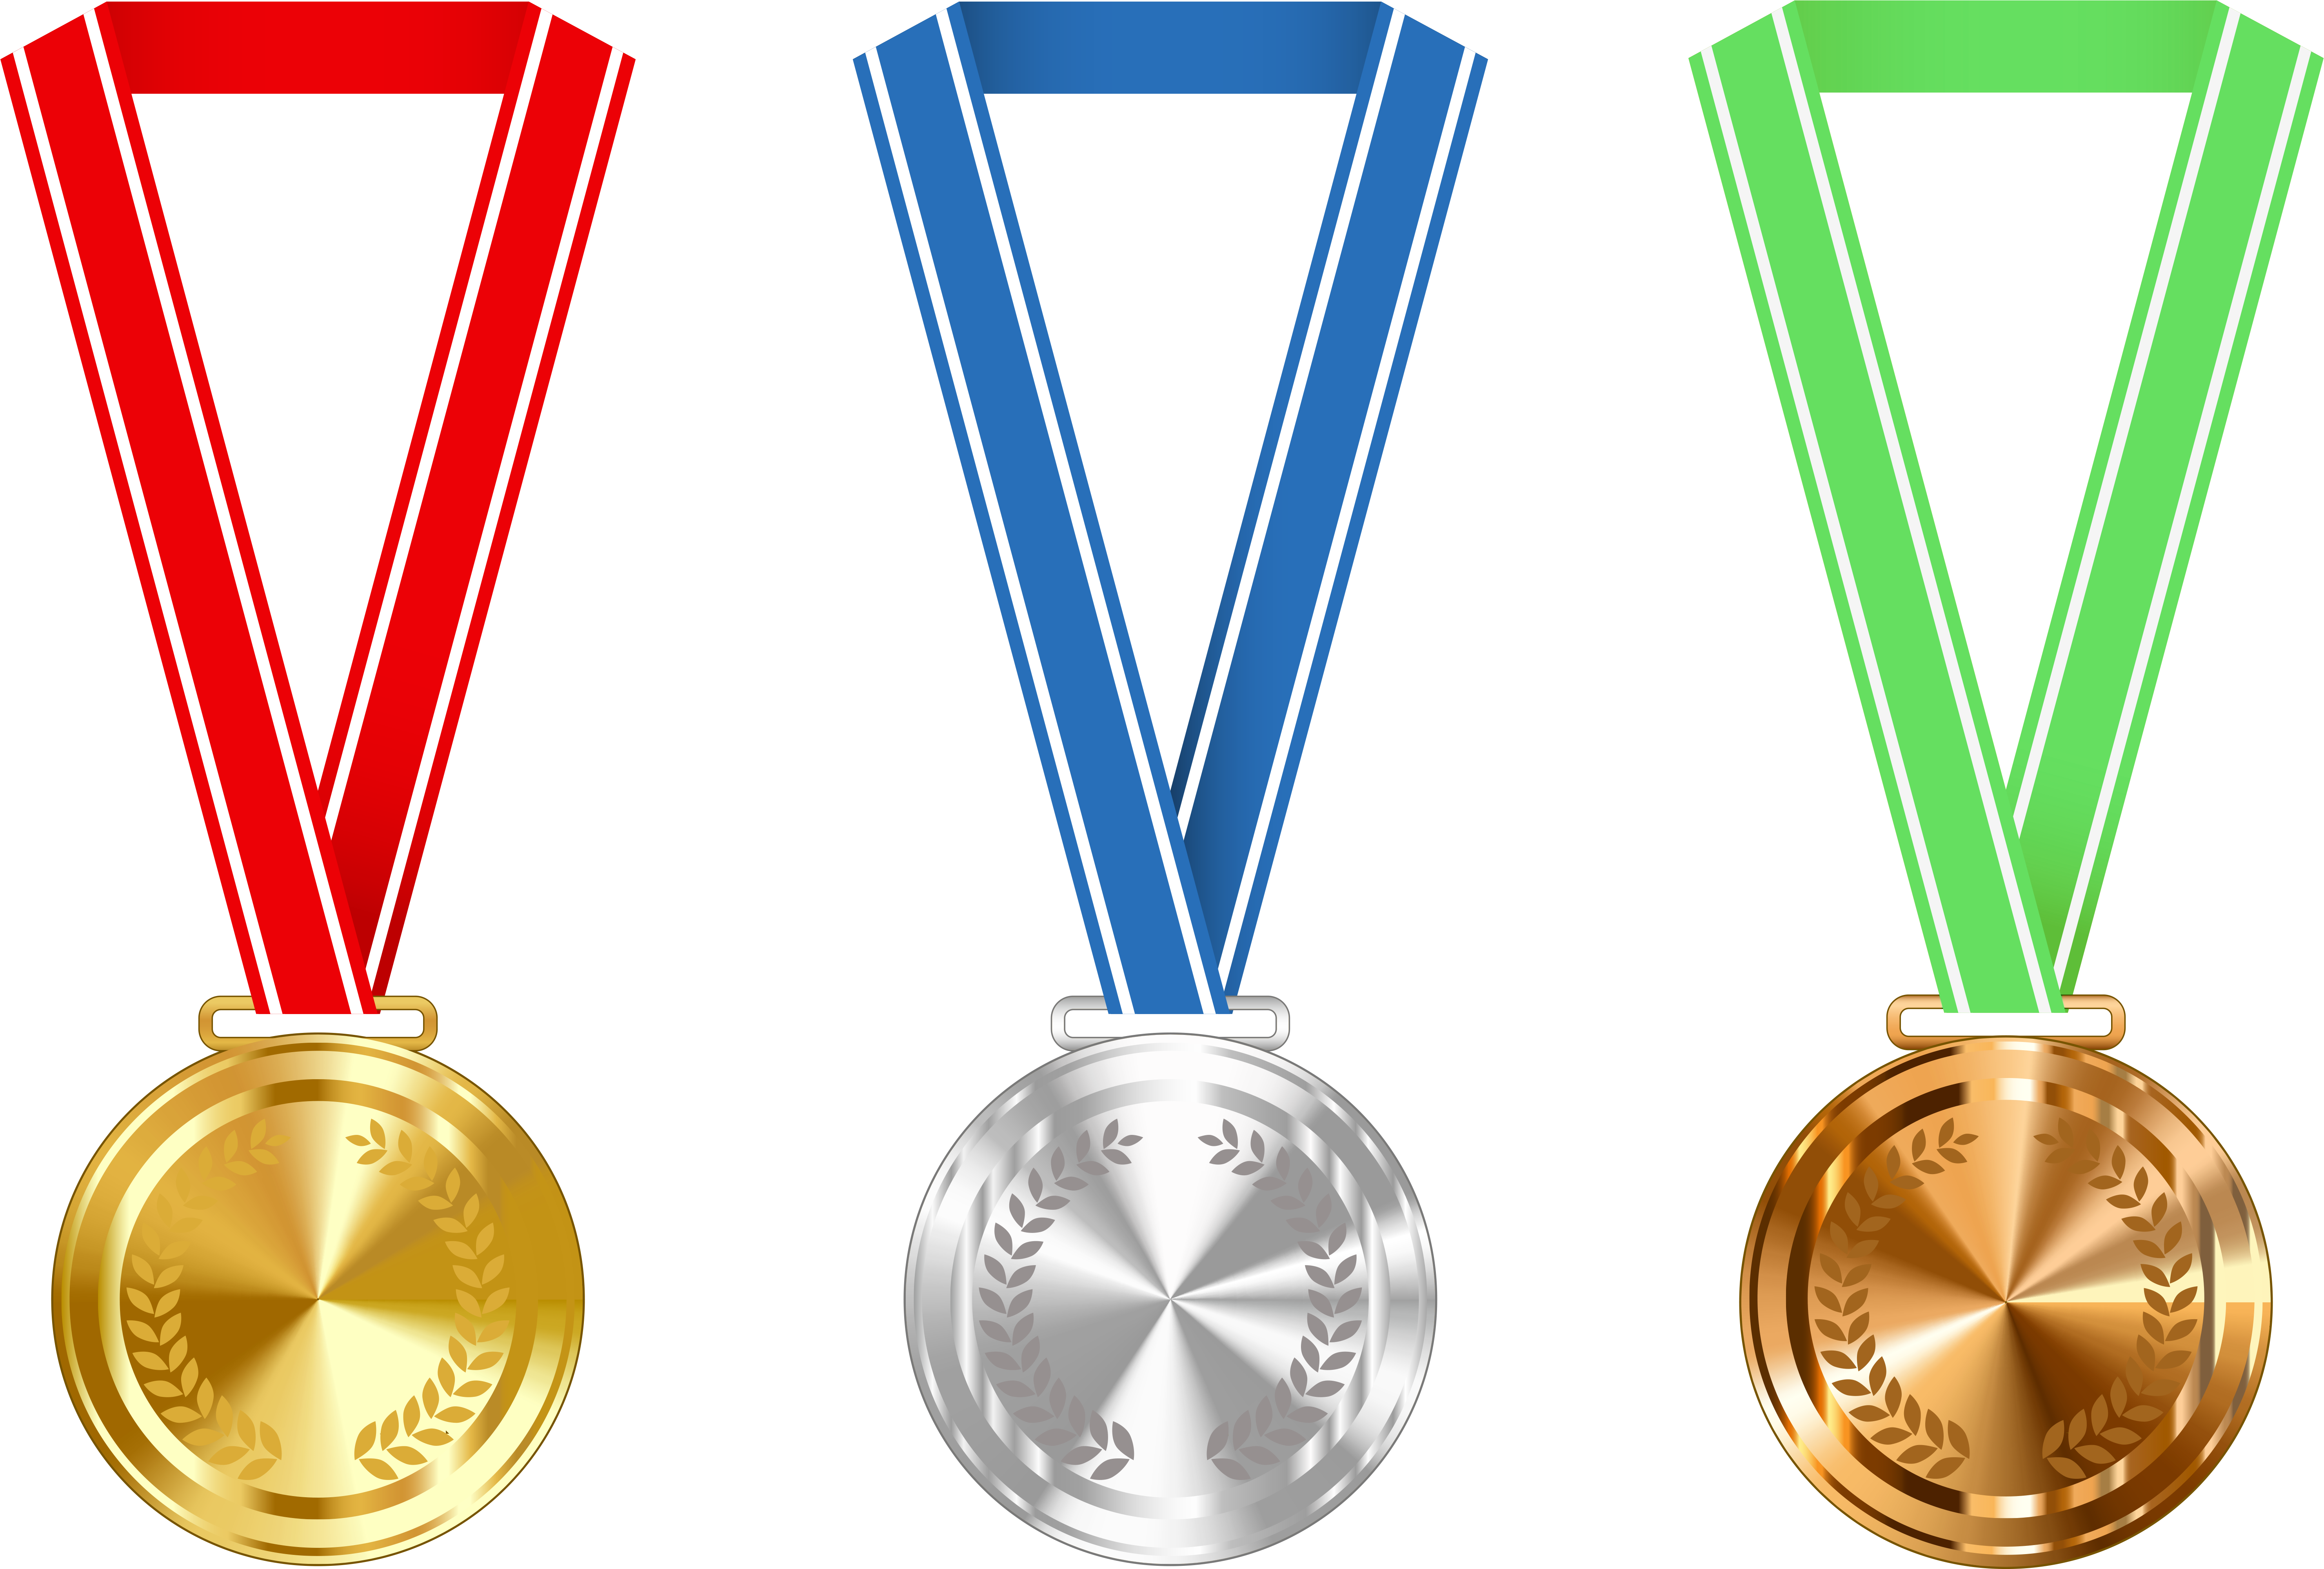 Medal - Gold Silver And Bronze Medals (6166x4166)